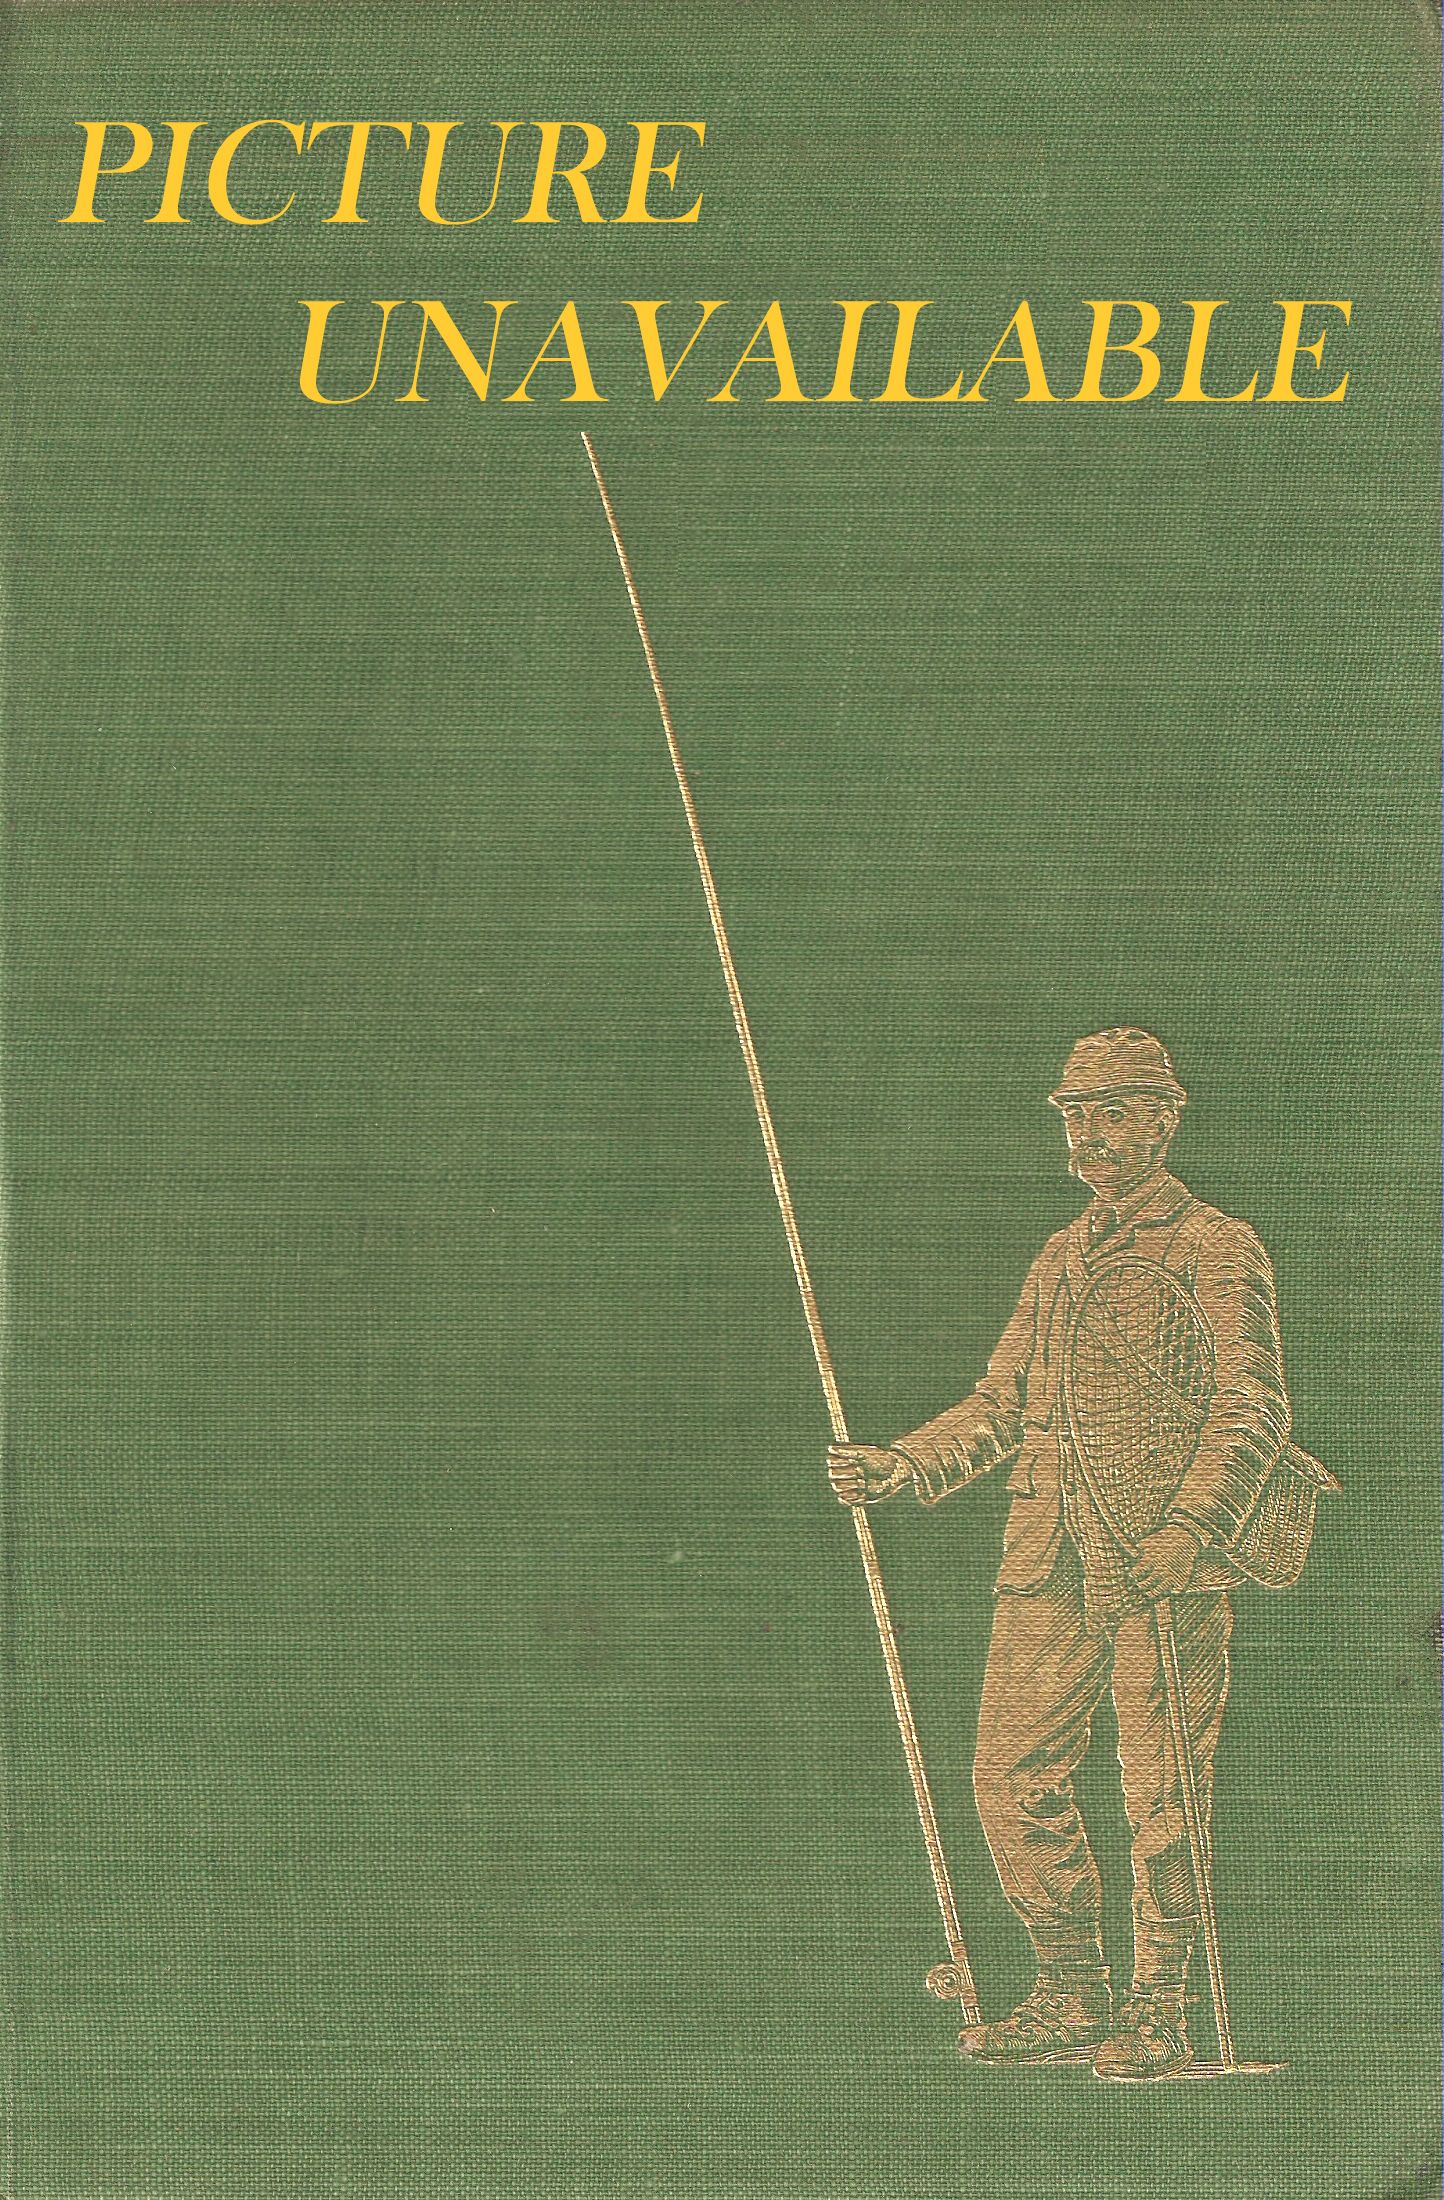 THE COMPLEAT McCLANE: A TREASURY OF A.J. McCLANE'S CLASSIC ANGLING  ADVENTURES. A.J. McClane. Edited and with an introduction by John Merwin.